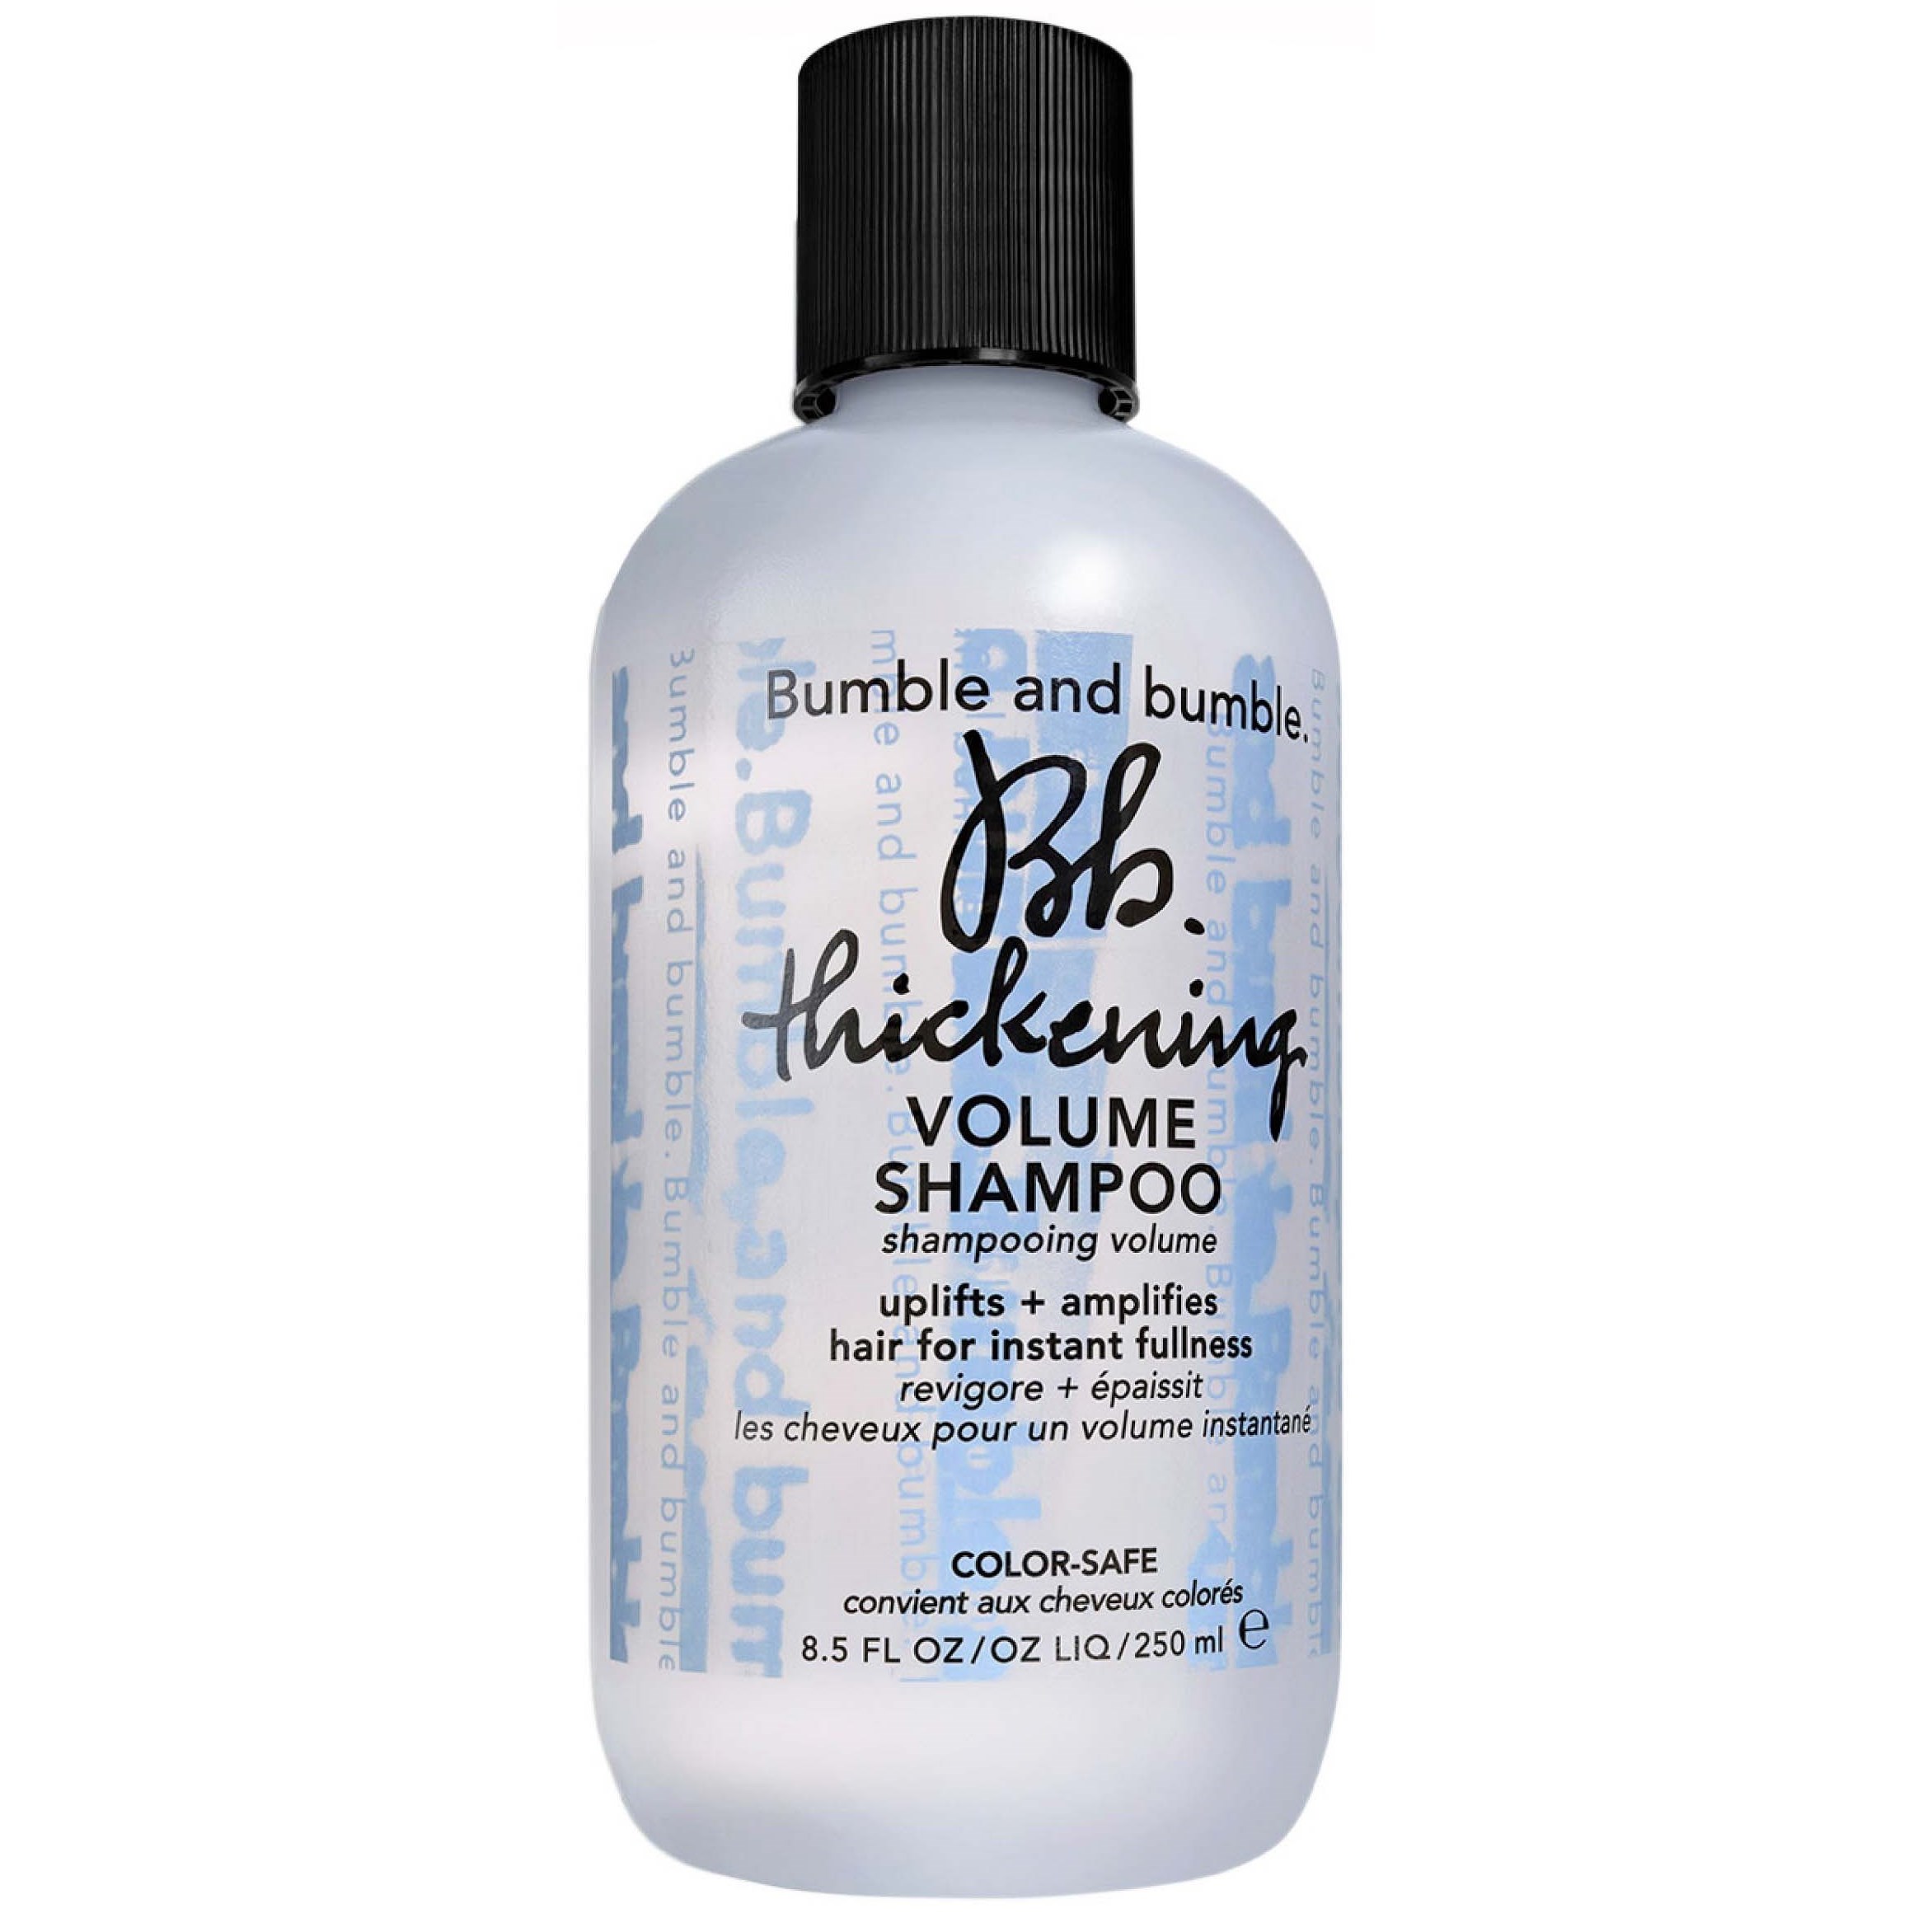 Läs mer om Bumble and bumble Thickening Shampoo 250 ml